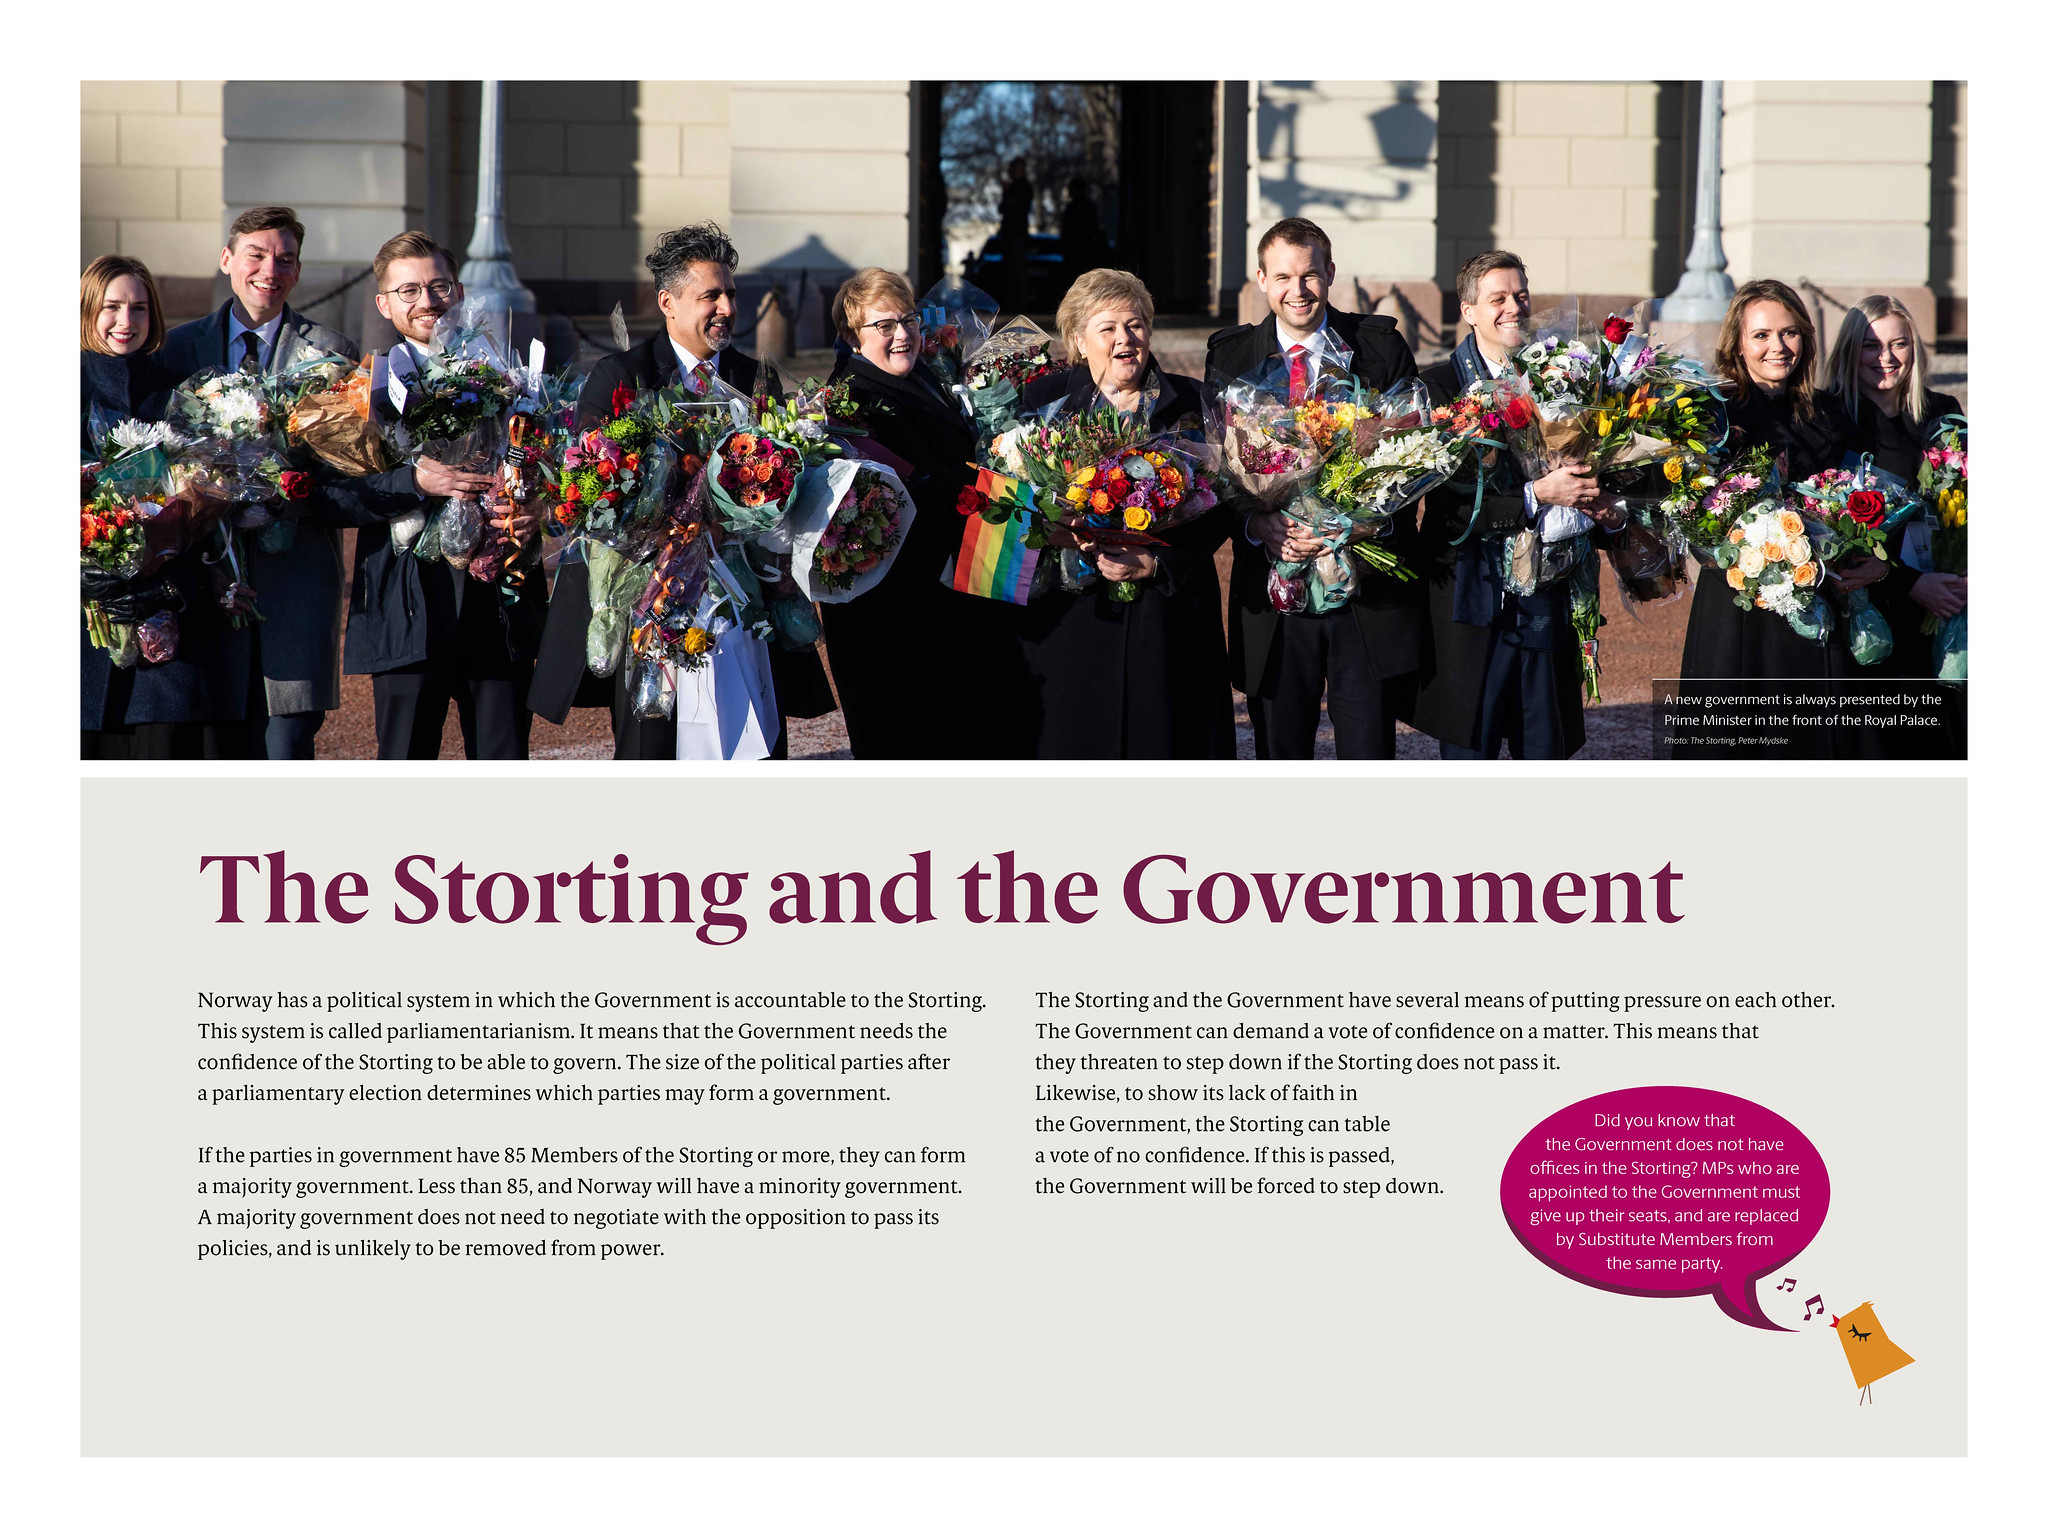 Poster describing the relationship between the Storting and the Government